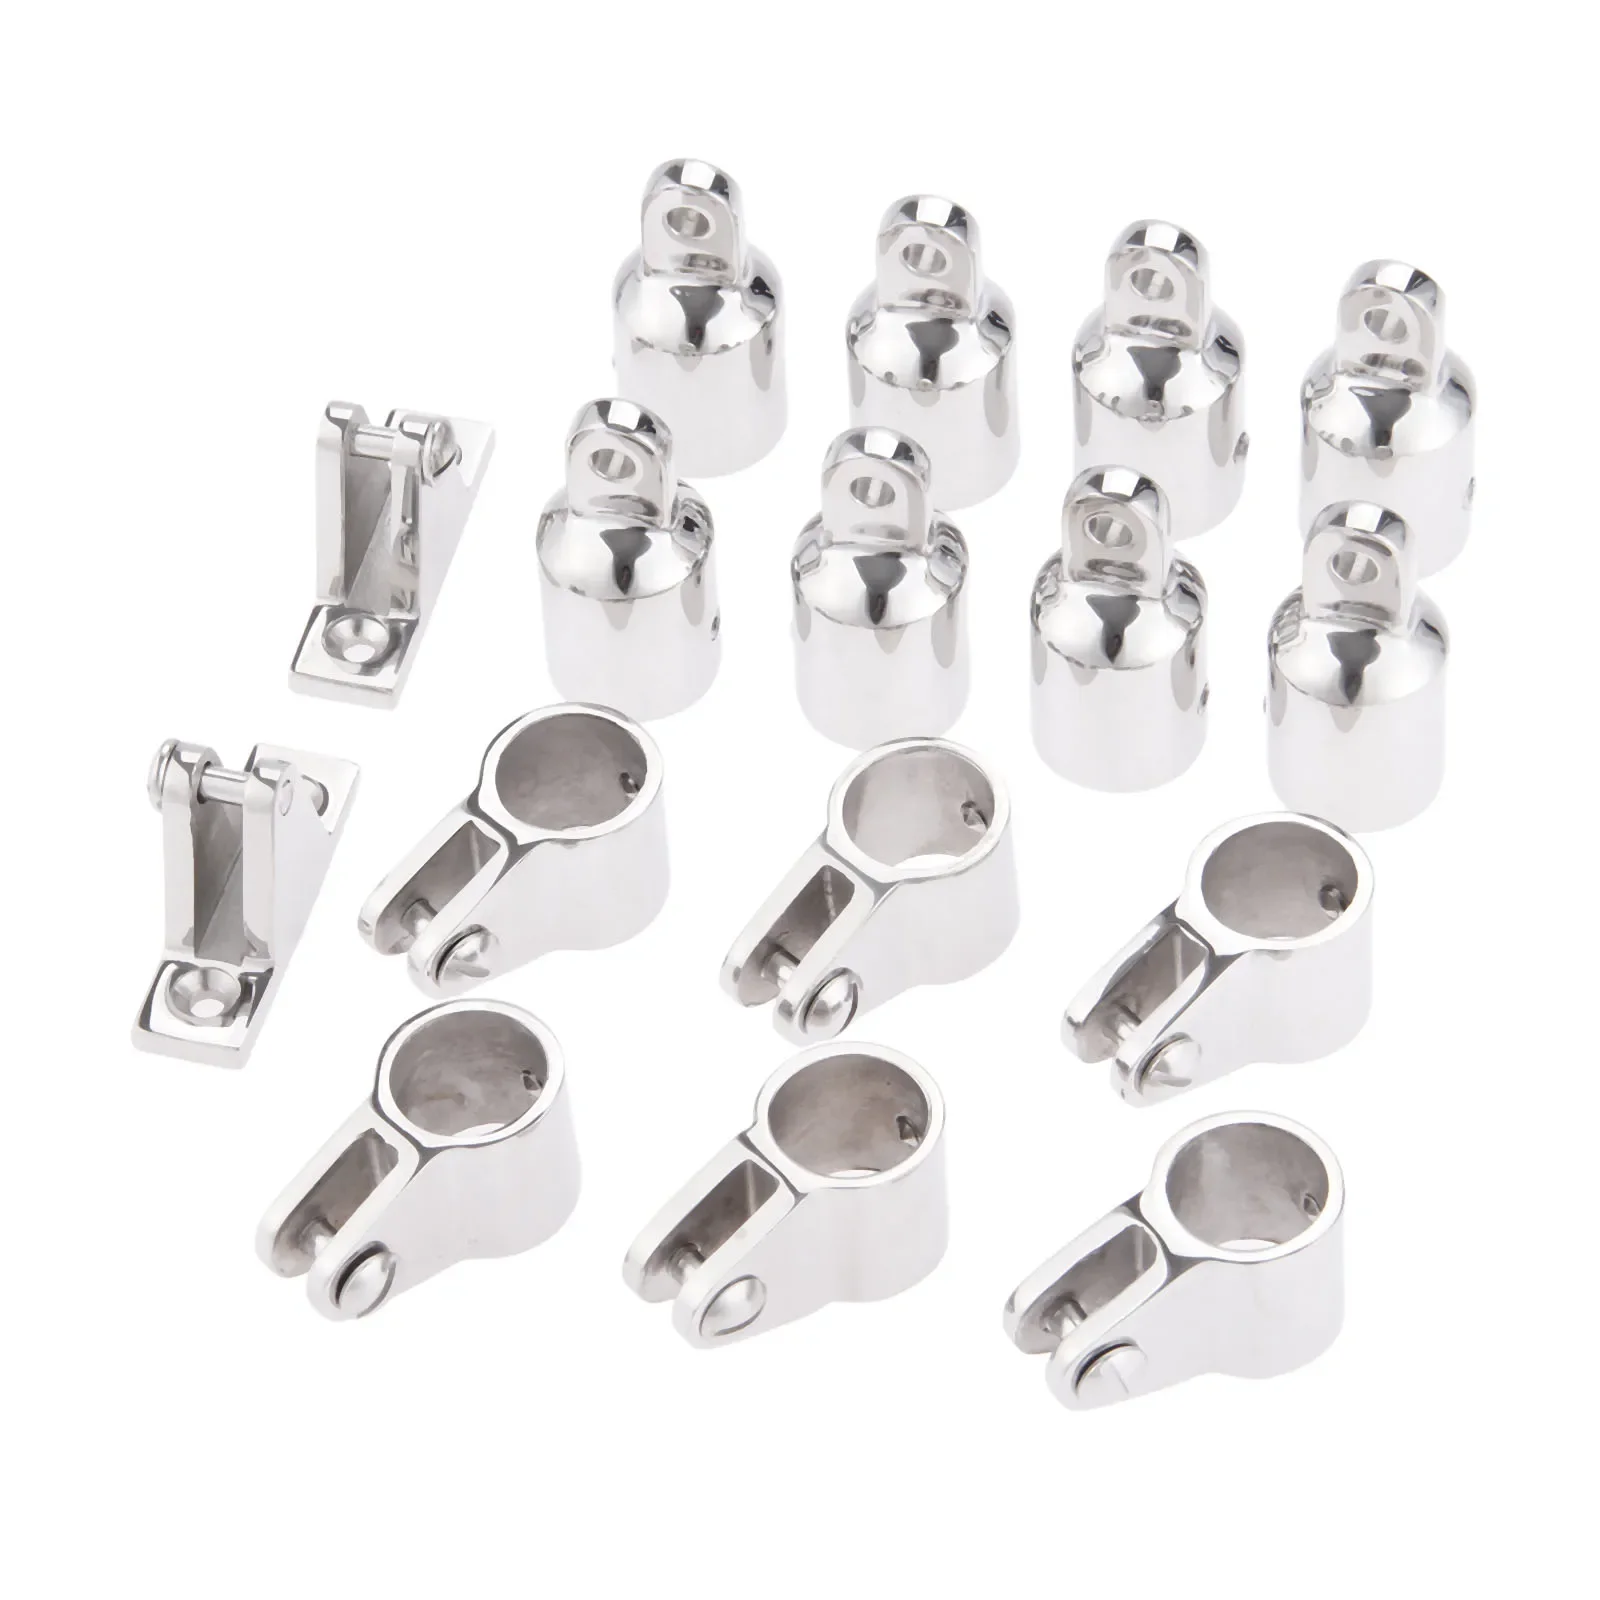 Marine Boat Top Hardware Fitting Set 4 Bow 22mm 7/8